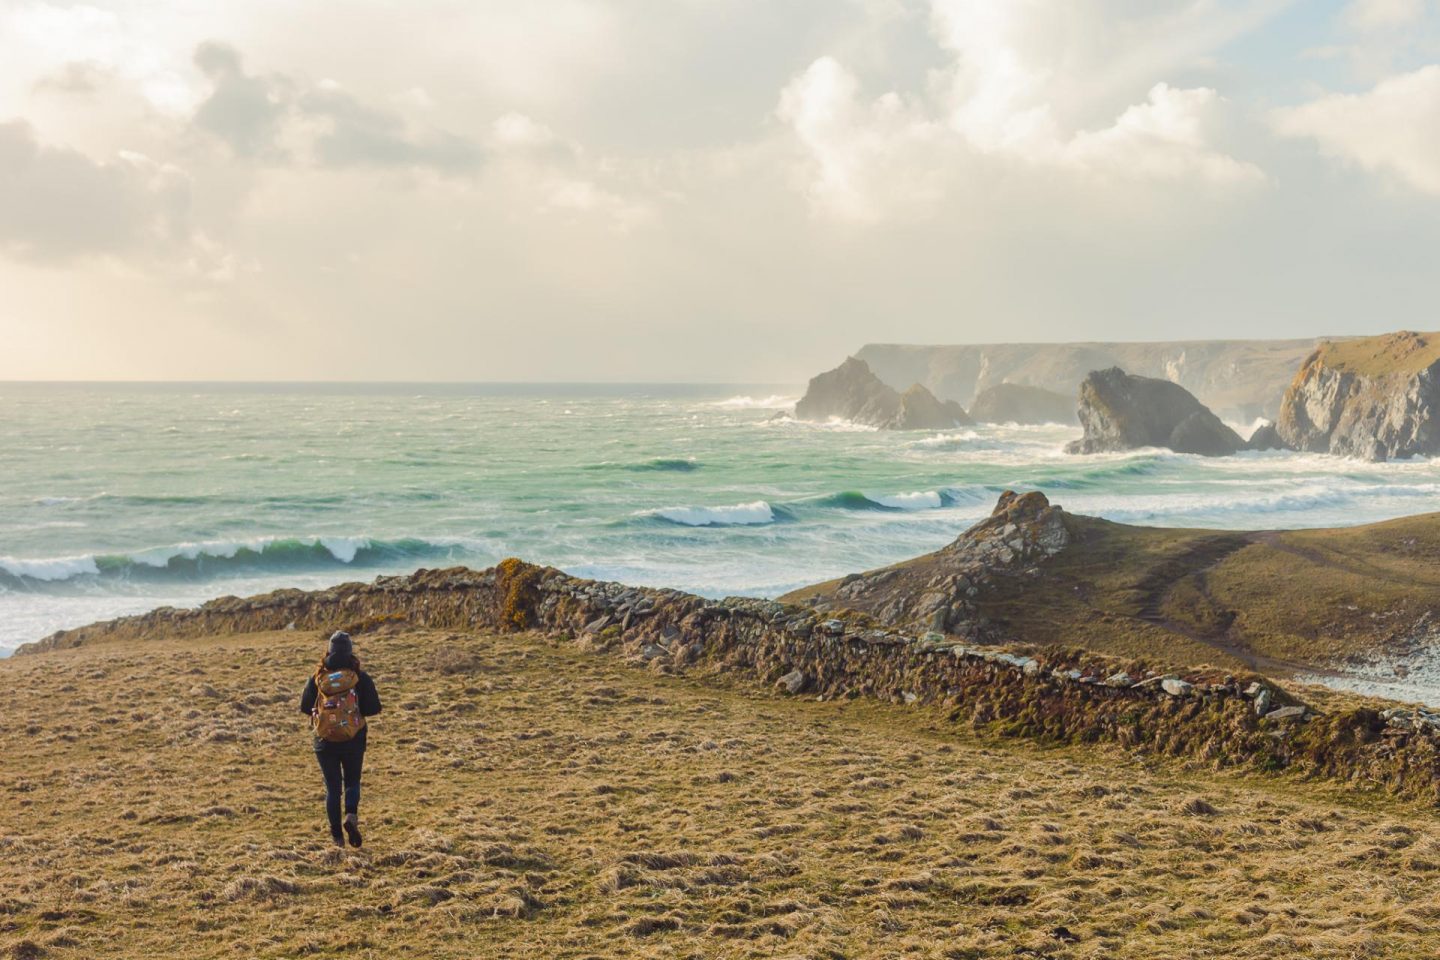 Cornwall’s Serpentine Coast: Following the South West Coast Path on the Lizard